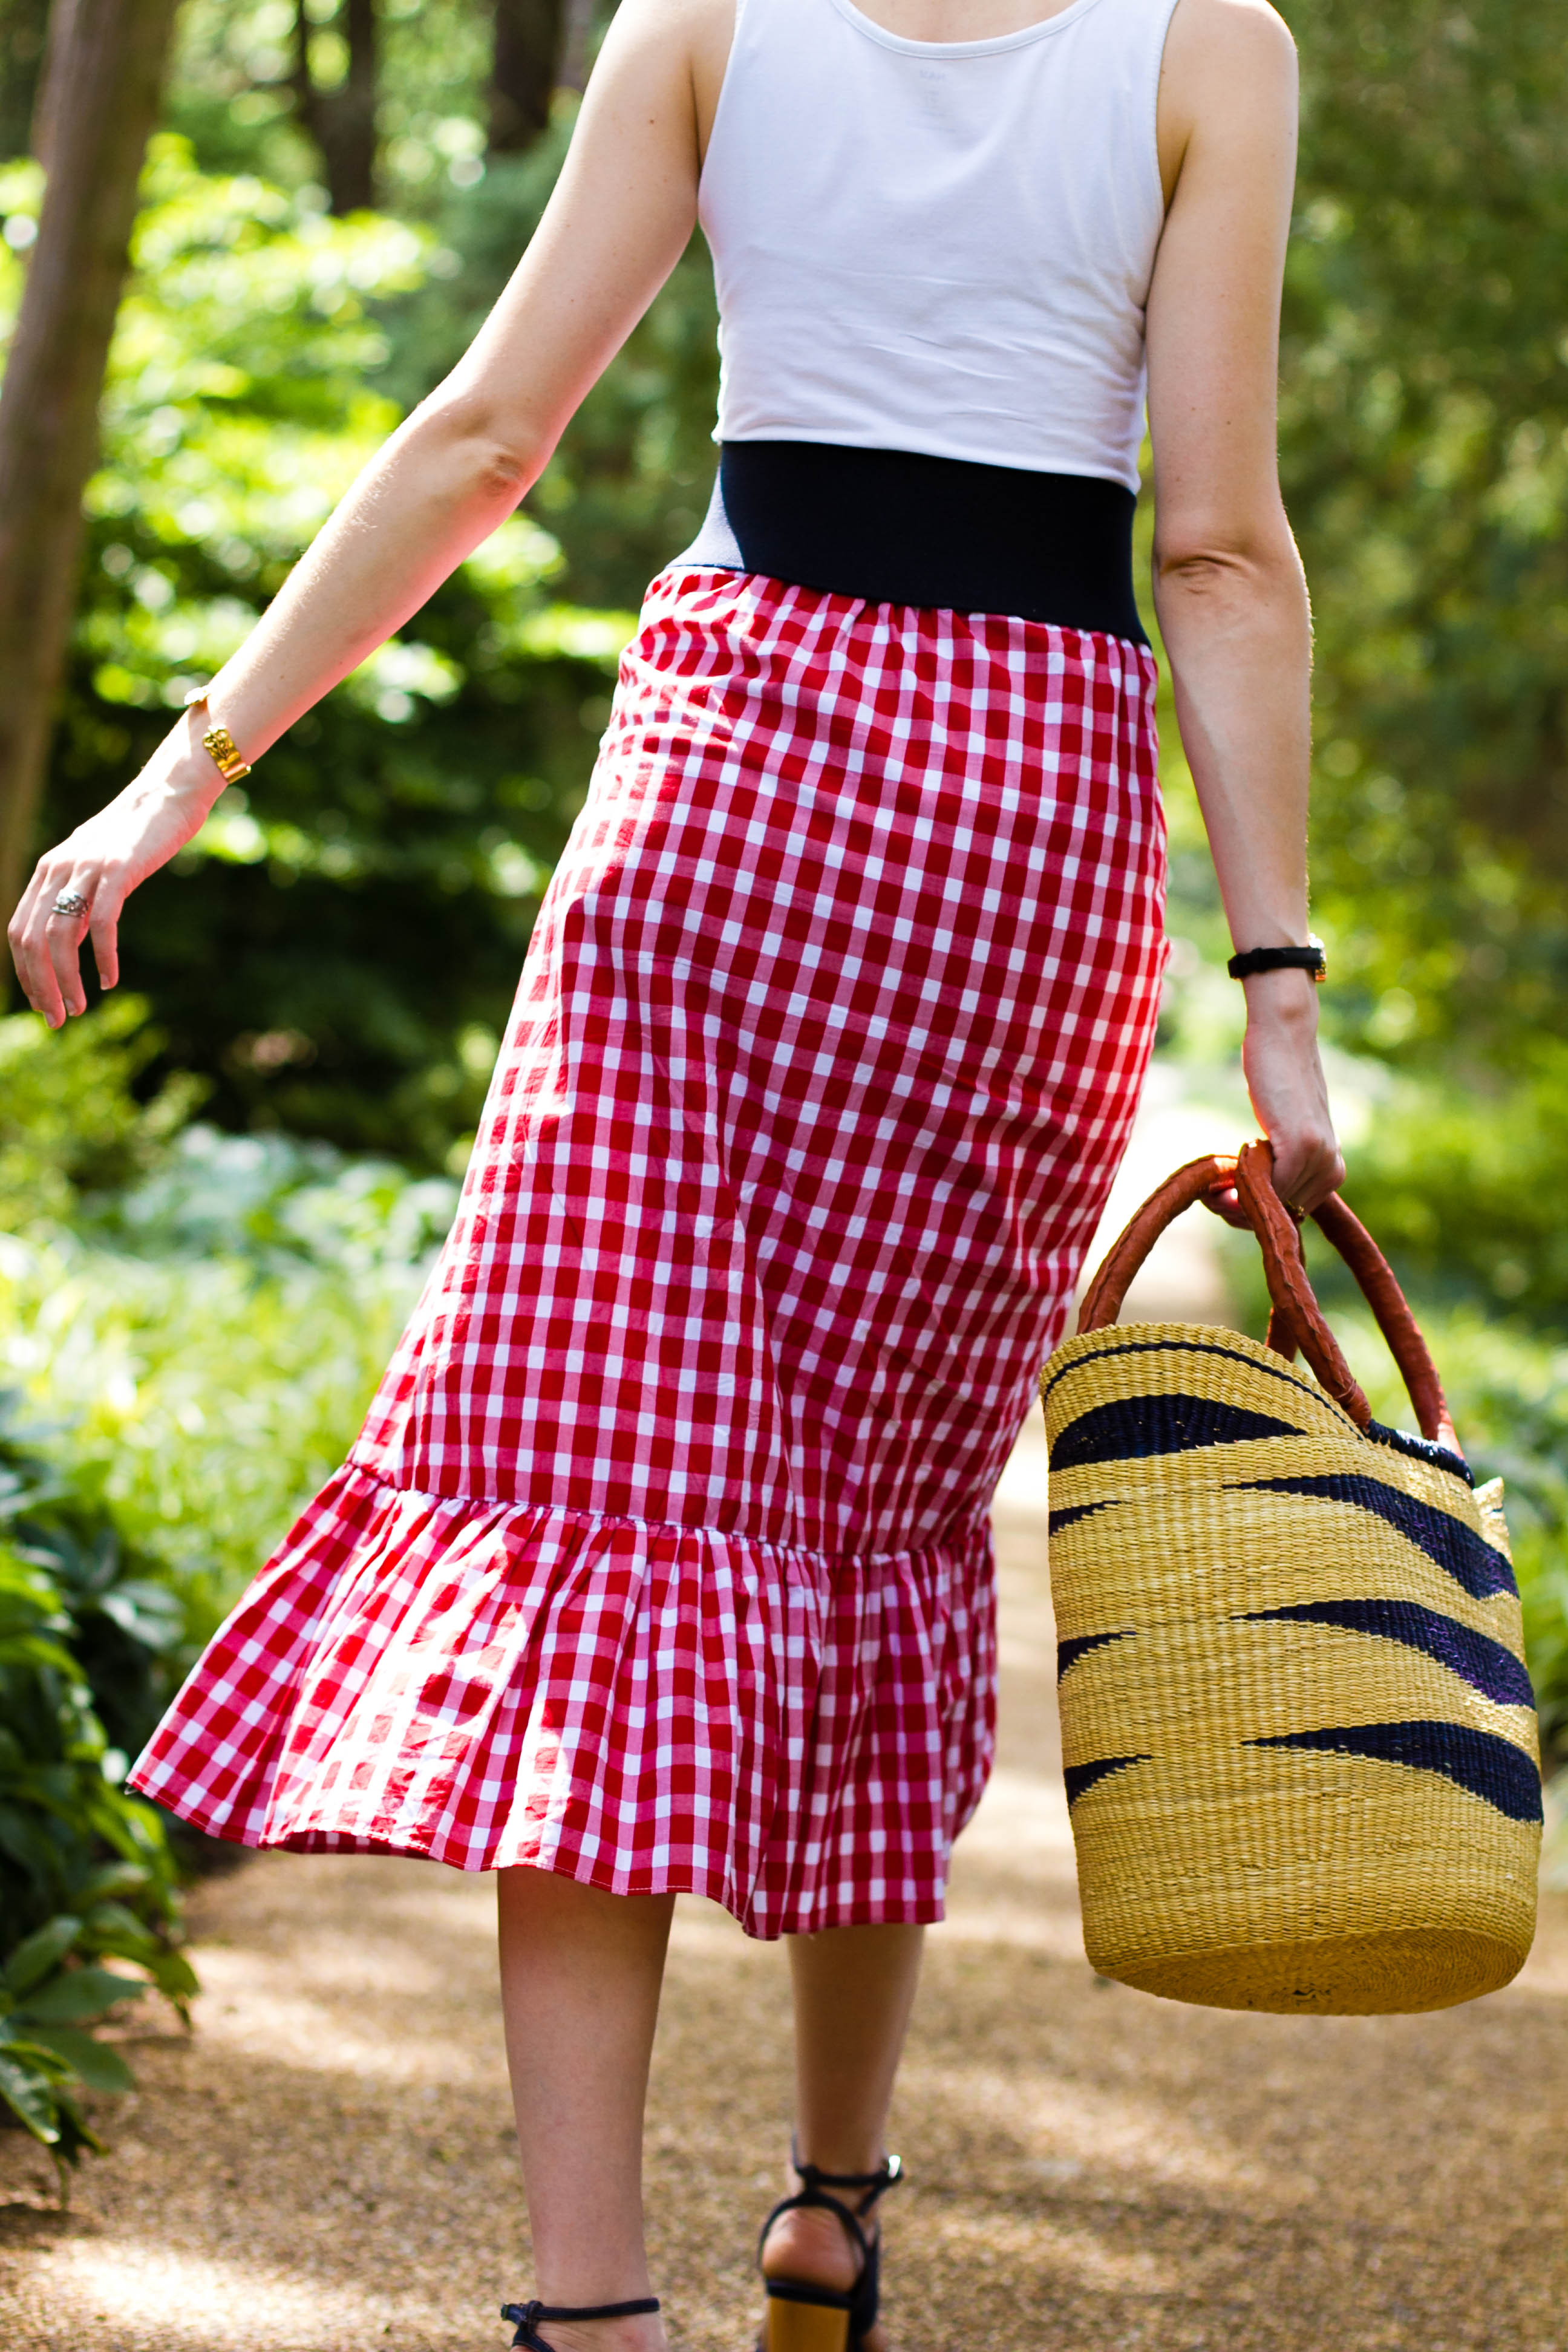 Zara gingham skirt, straw bag, and Cluse watch